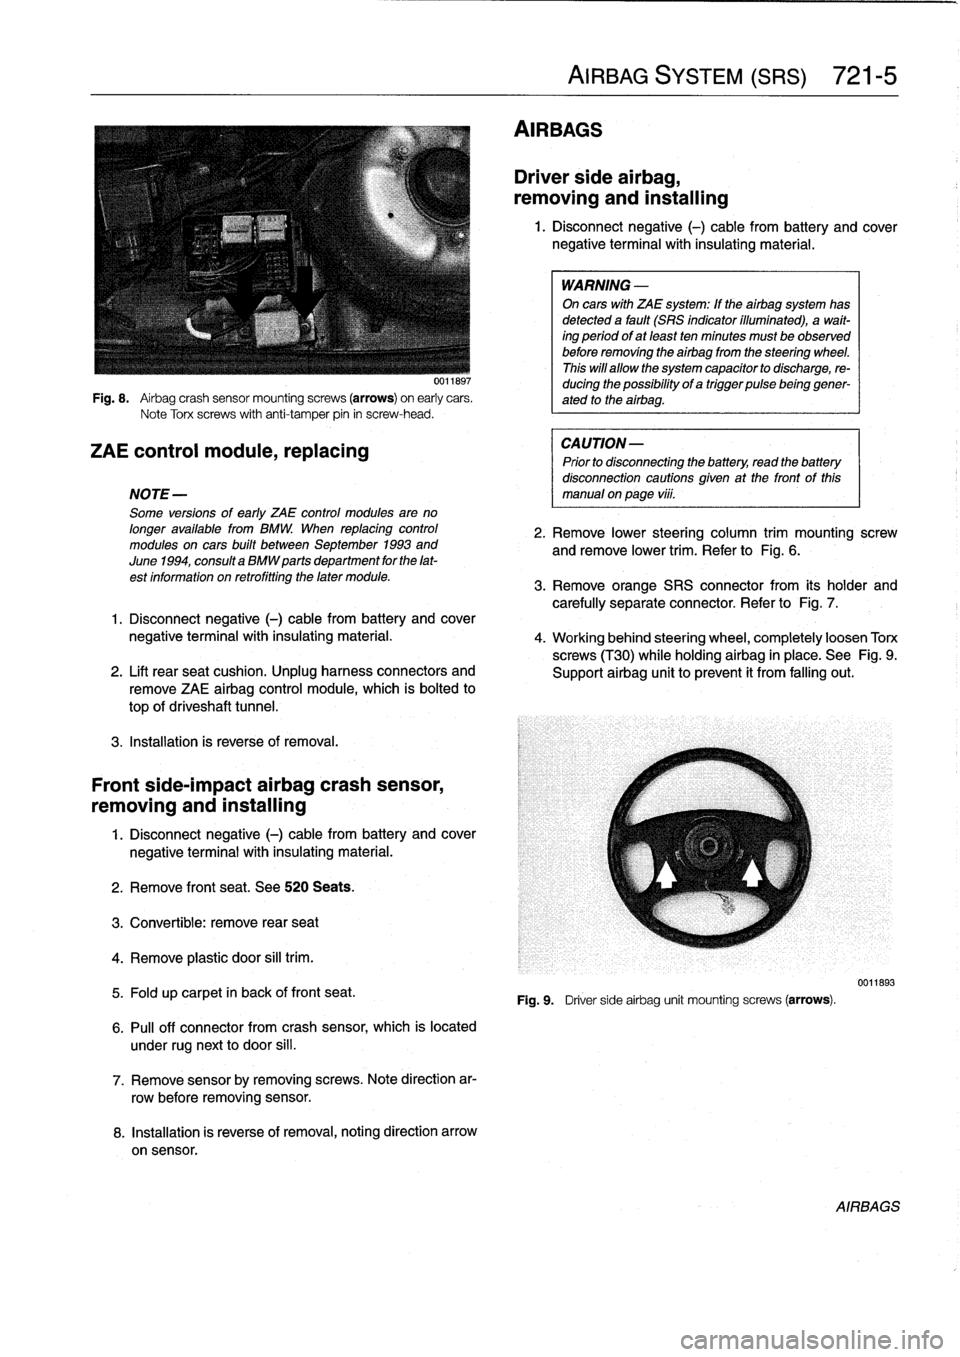 BMW 328i 1997 E36 Workshop Manual 
Fig
.
8
.

	

Airbag
crash
sensor
mountingscrews
(arrows)
on
early
cars
.
Note
Torx
screws
with
anti-tamper
pin
in
screw-head
.

ZAE
control
module,
replacing

NOTE-

Some
versions
of
early
ZAE
contr